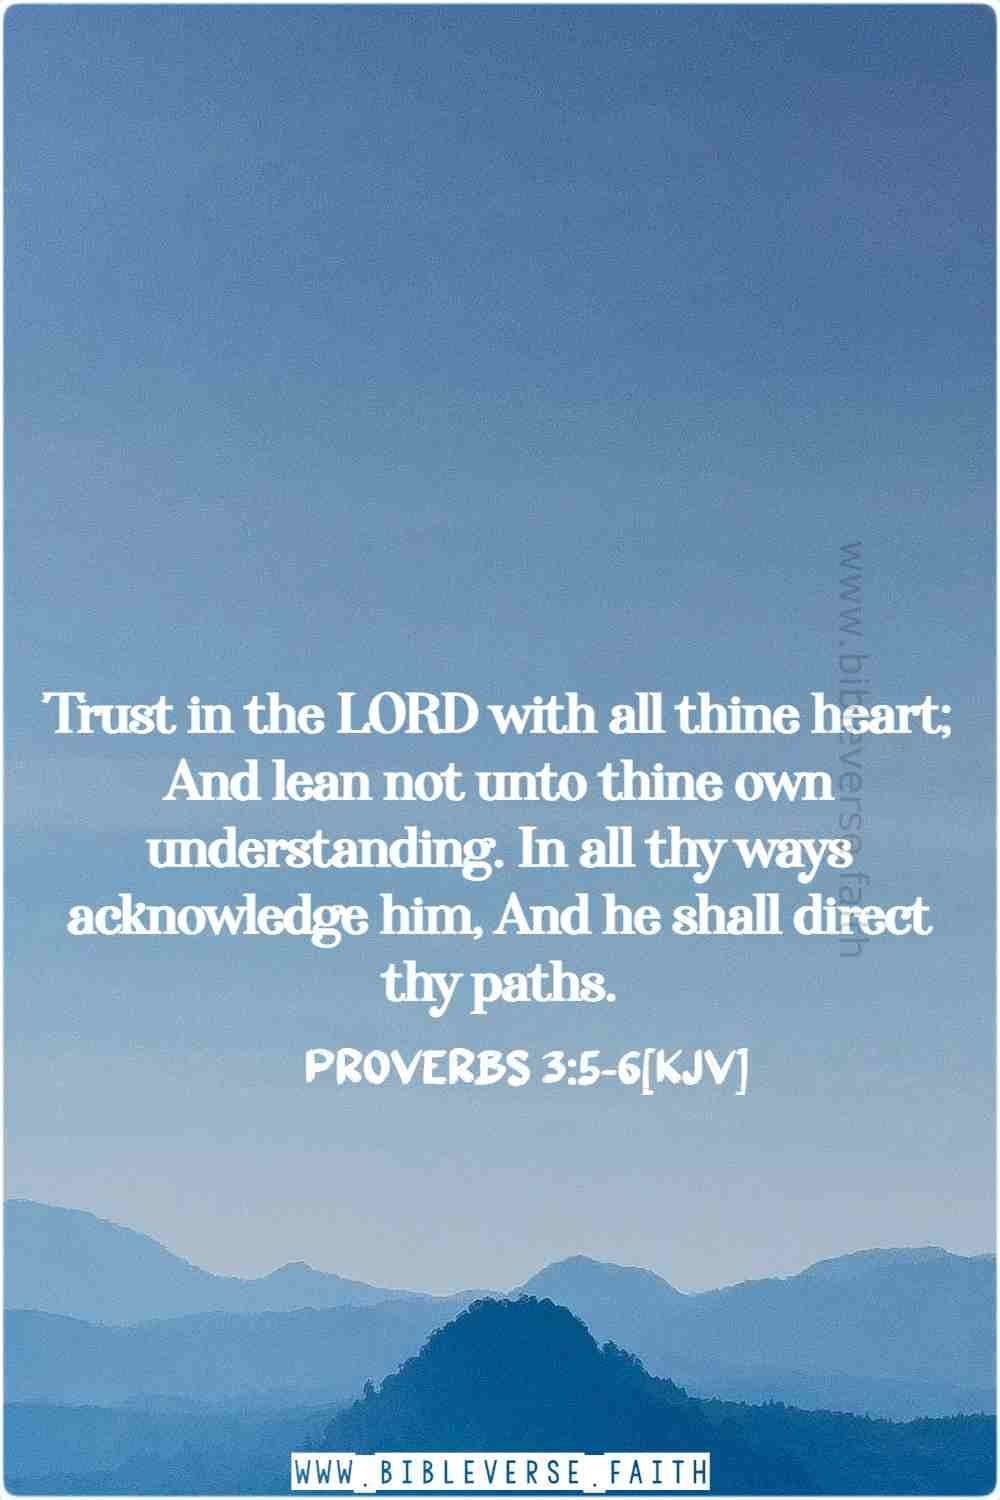 proverbs 3 5 6[kjv] trust in the lord with all your heart kjv